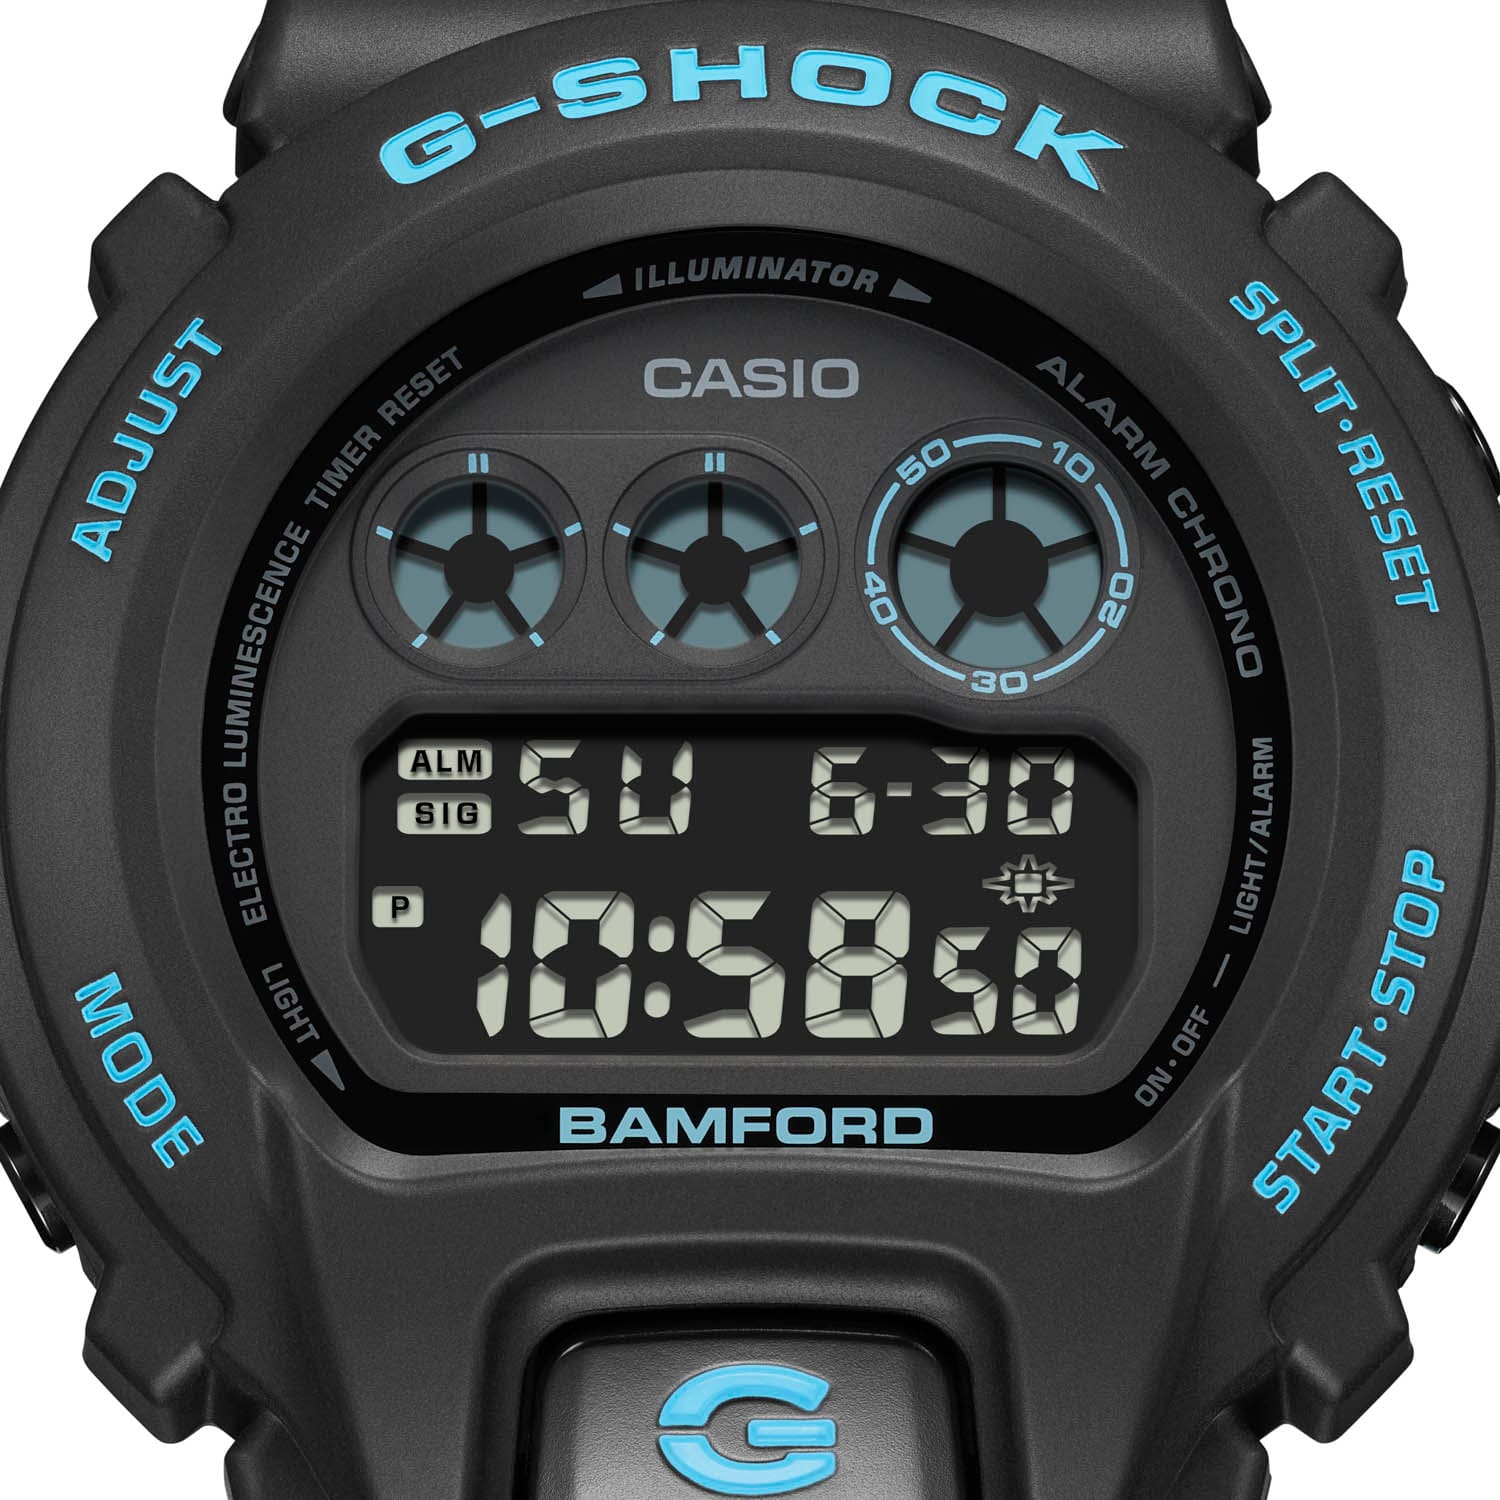 tight shot of the DW6900BWD Bamford x G-SHOCK watch face showing details of the blue accents